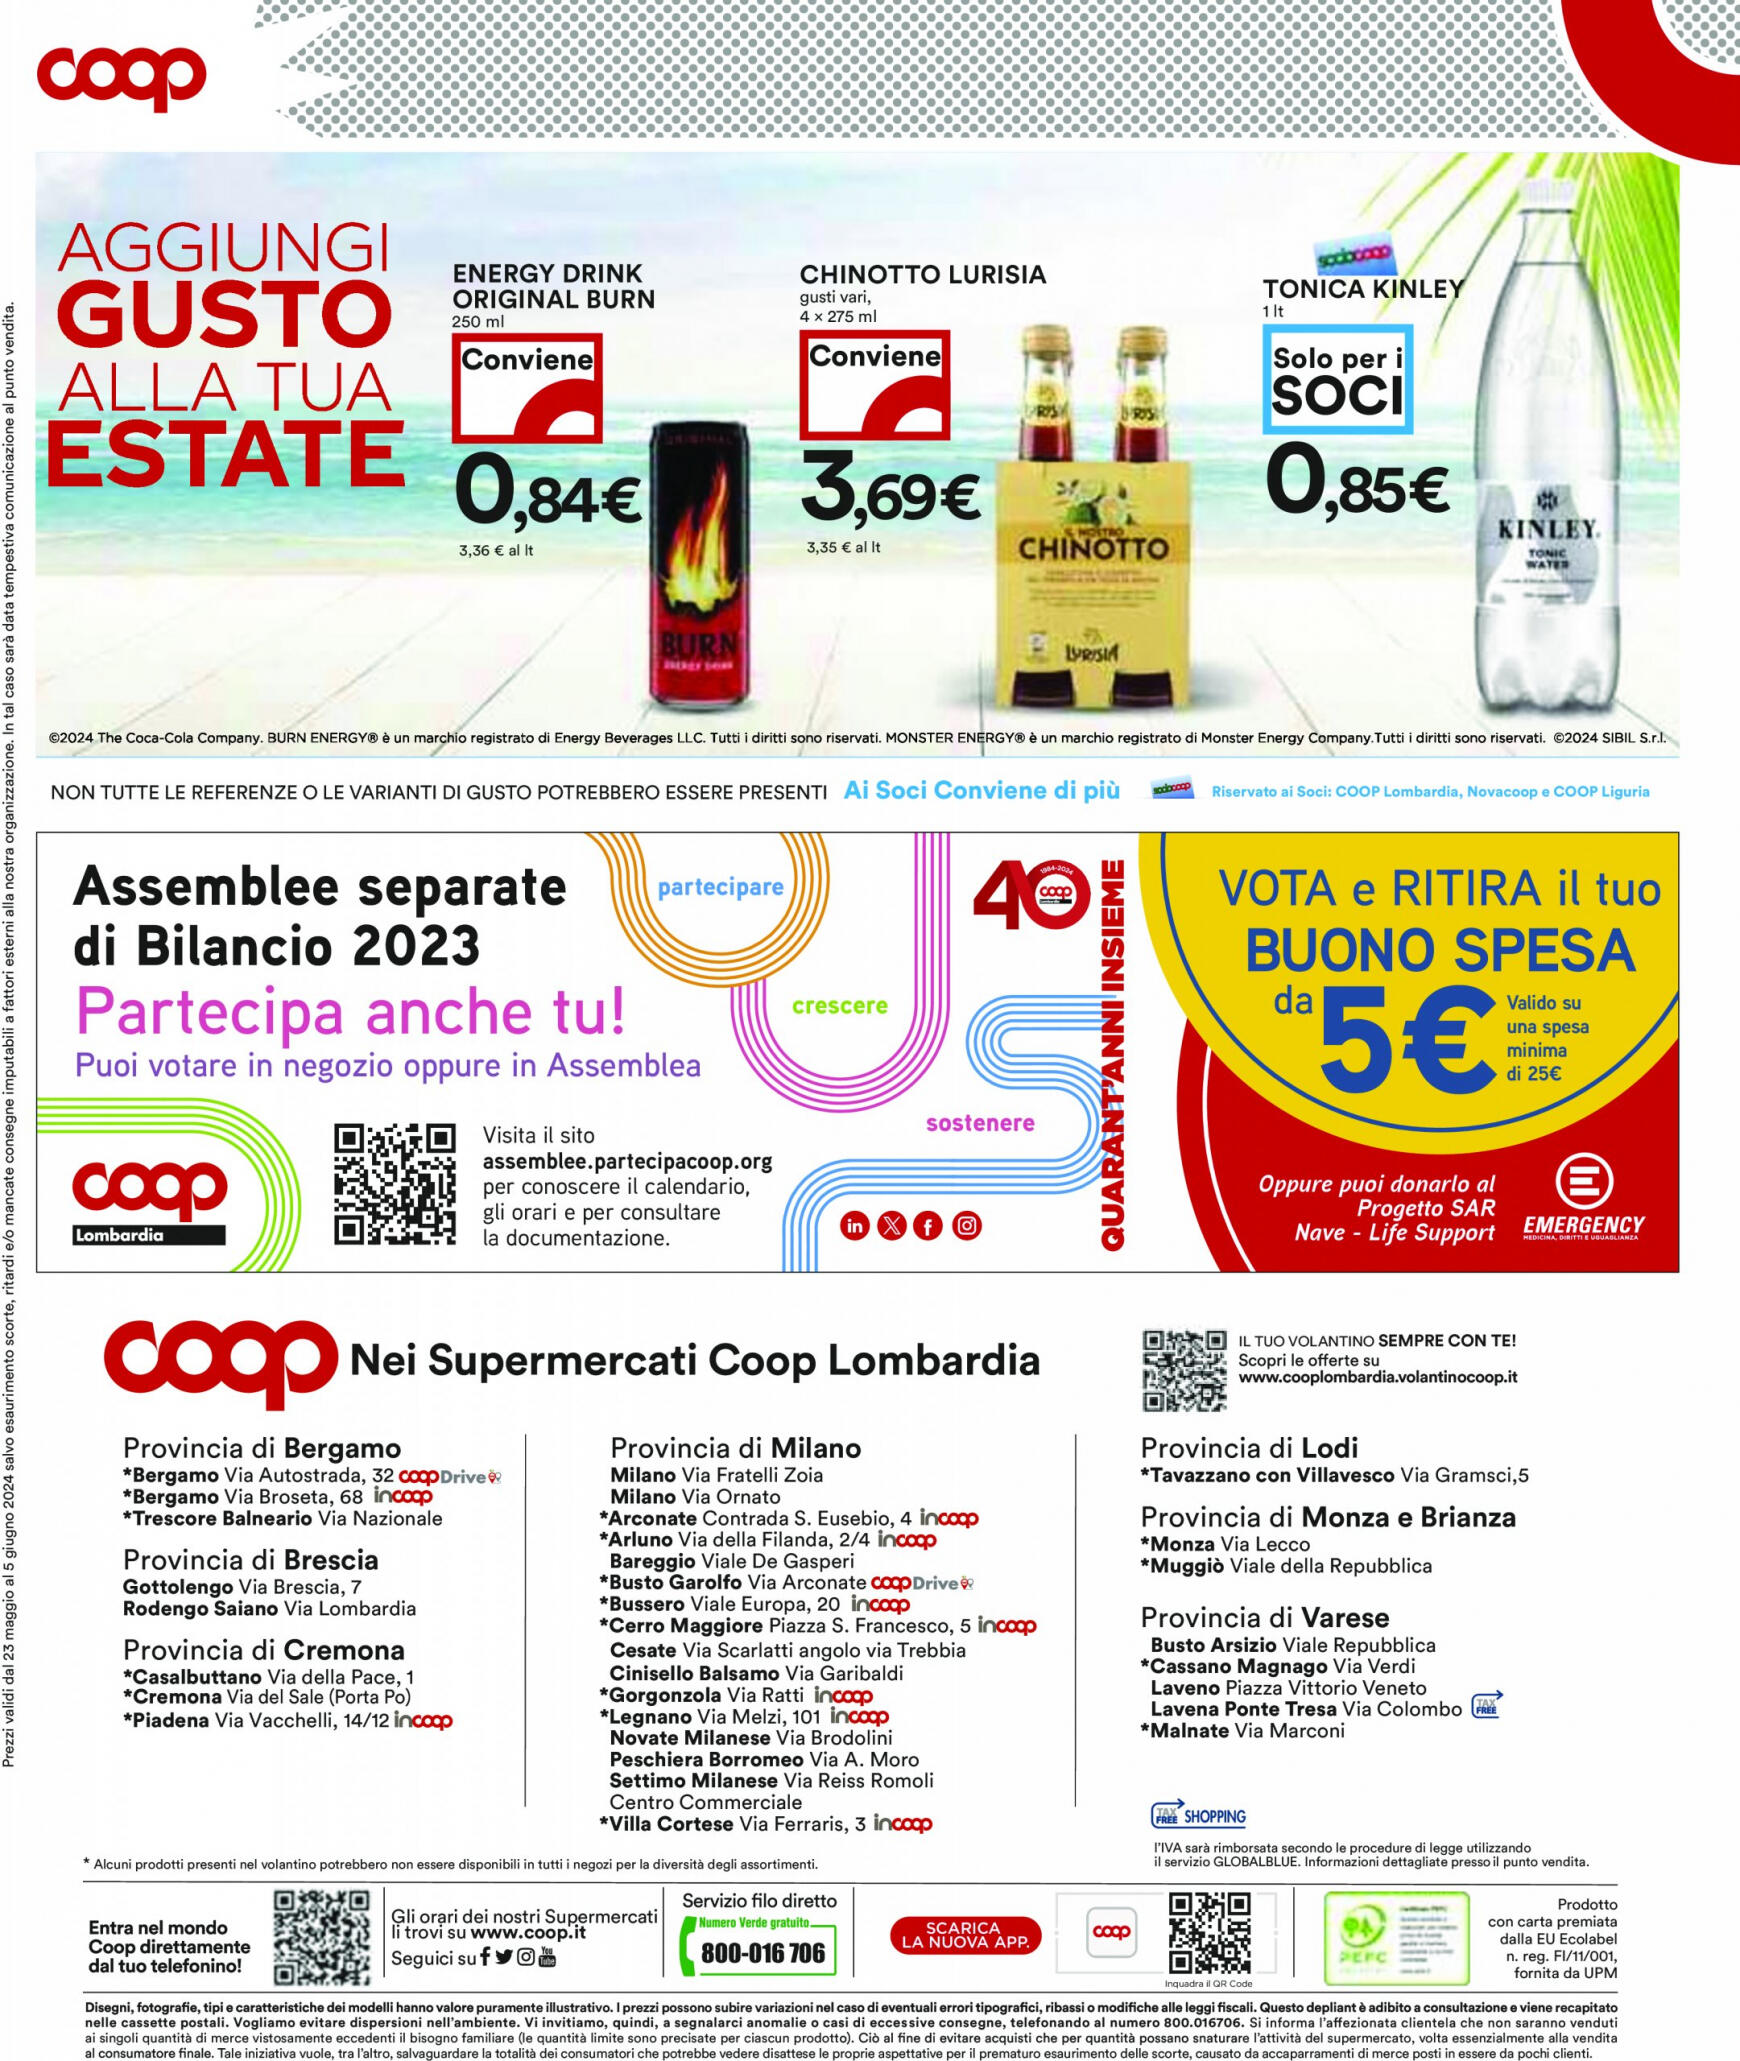 coop - Nuovo volantino Coop 23.05. - 05.06. - page: 20